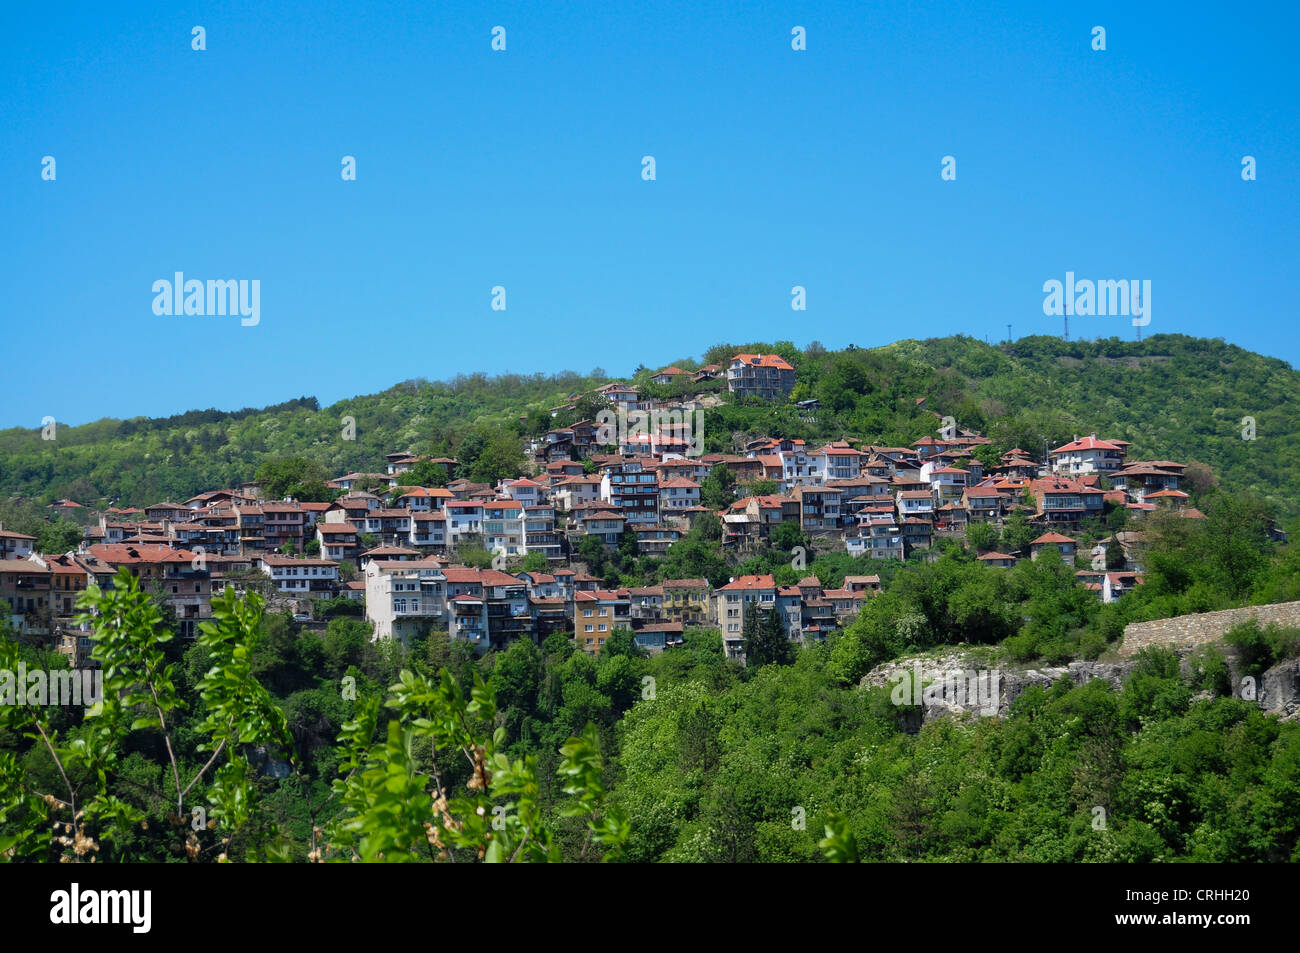 Typical bulgarian architecture from the town of Veliko Turnovo Stock Photo